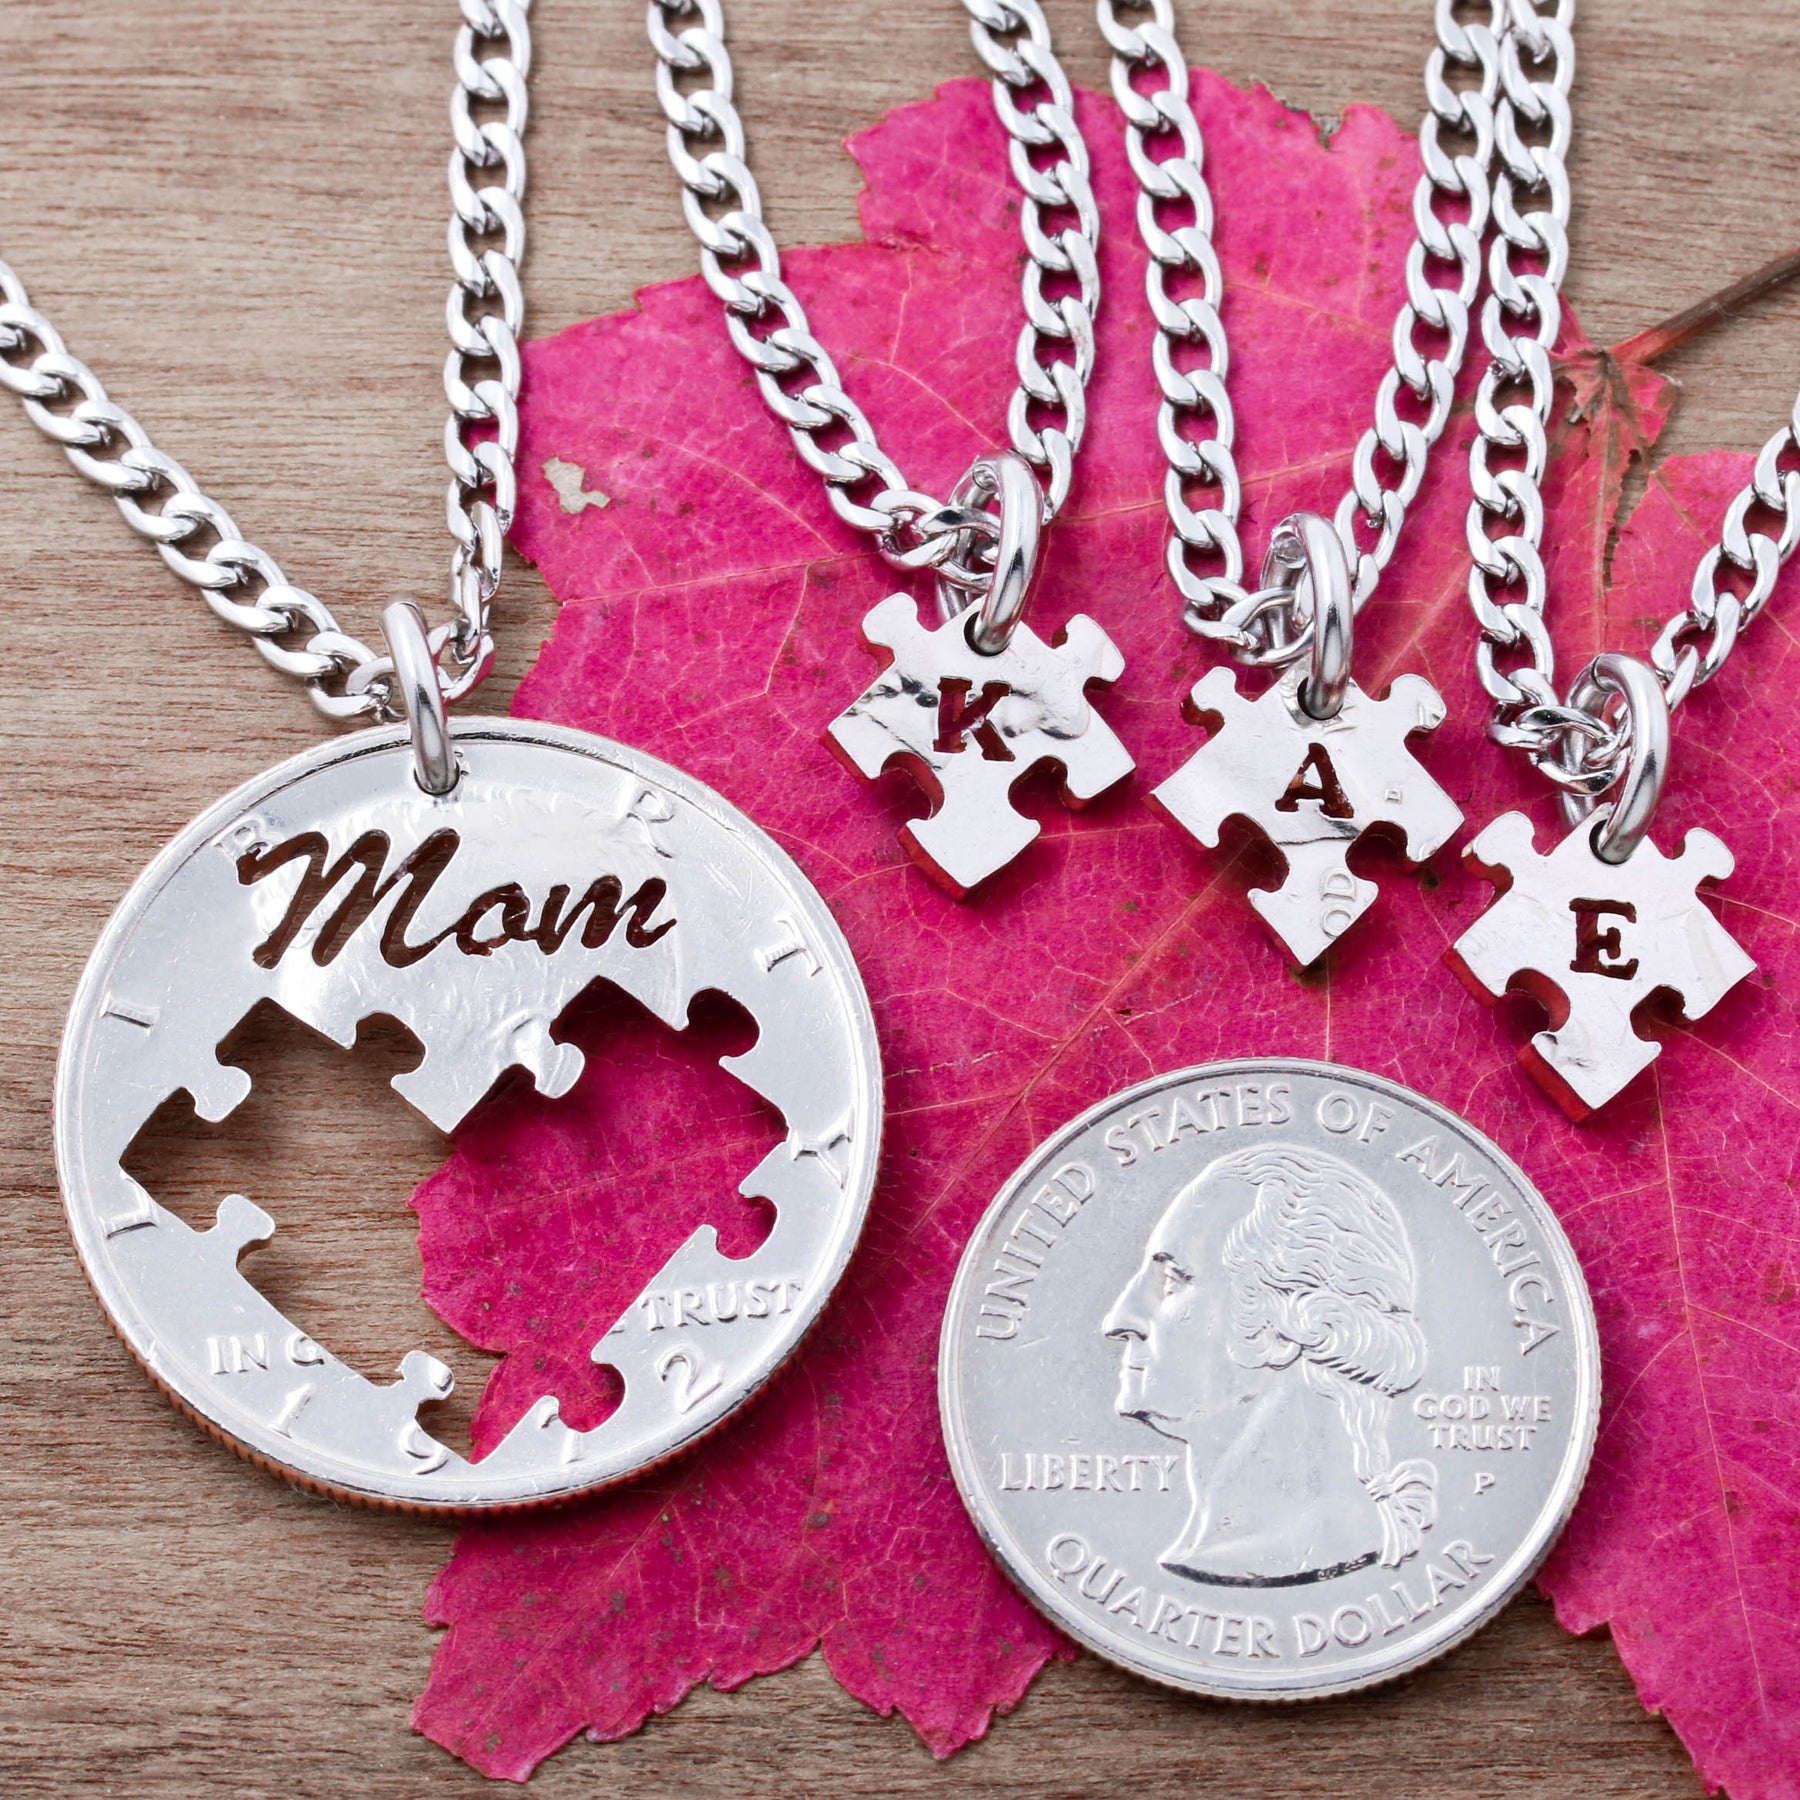 Personalized Mother Child Necklace 1-5 Kids Name Charm For Mom Grandma  Mother | eBay